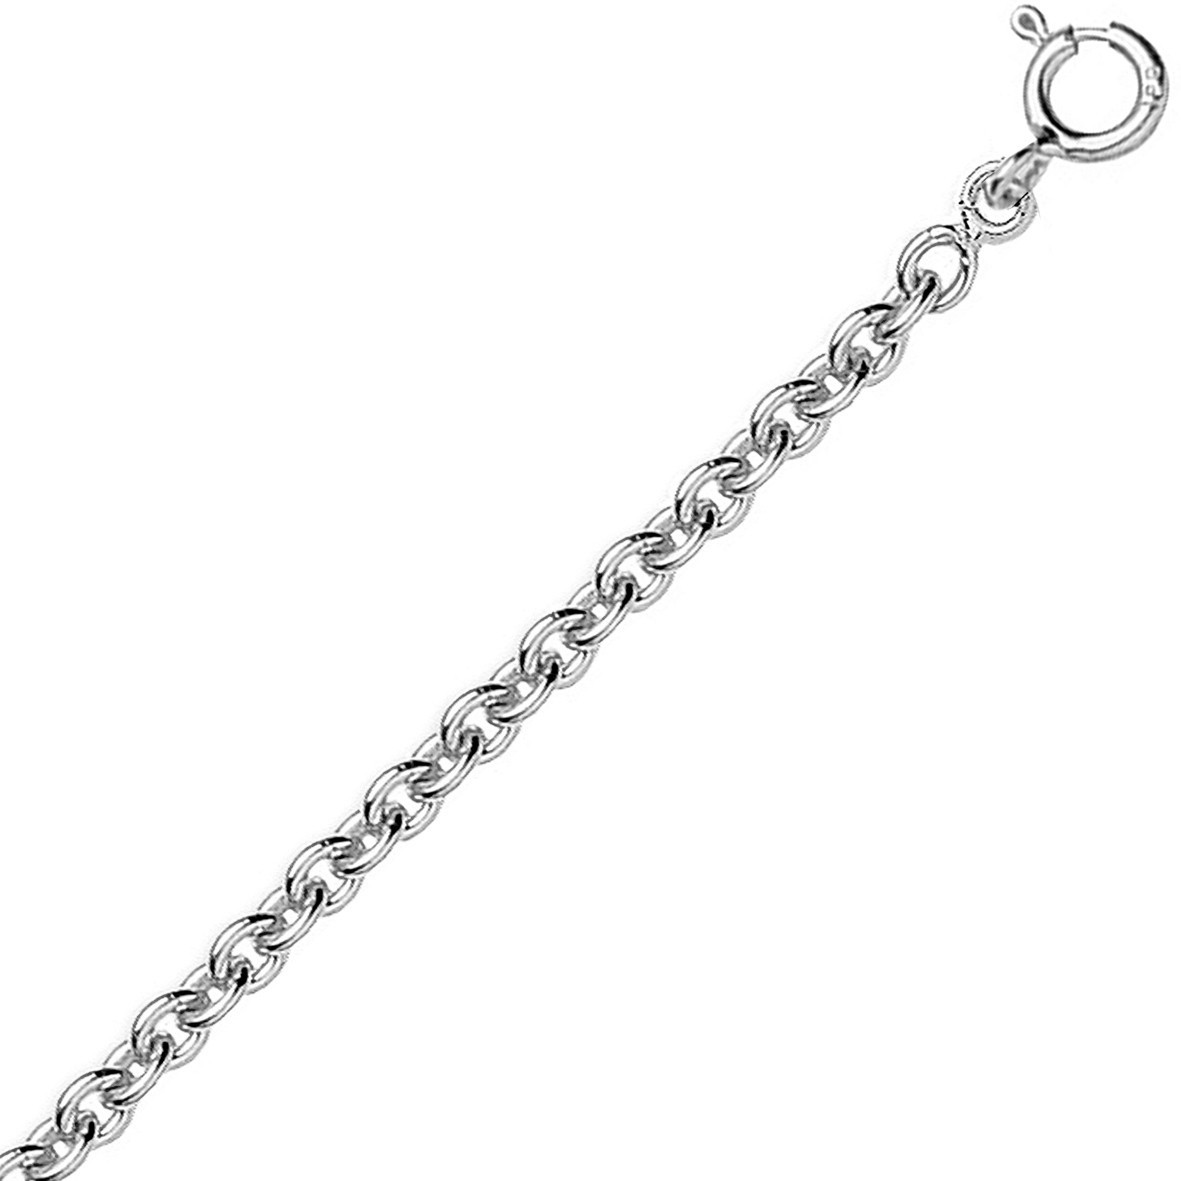 Chaine or blanc 18k maille forçat ronde 1,30mm